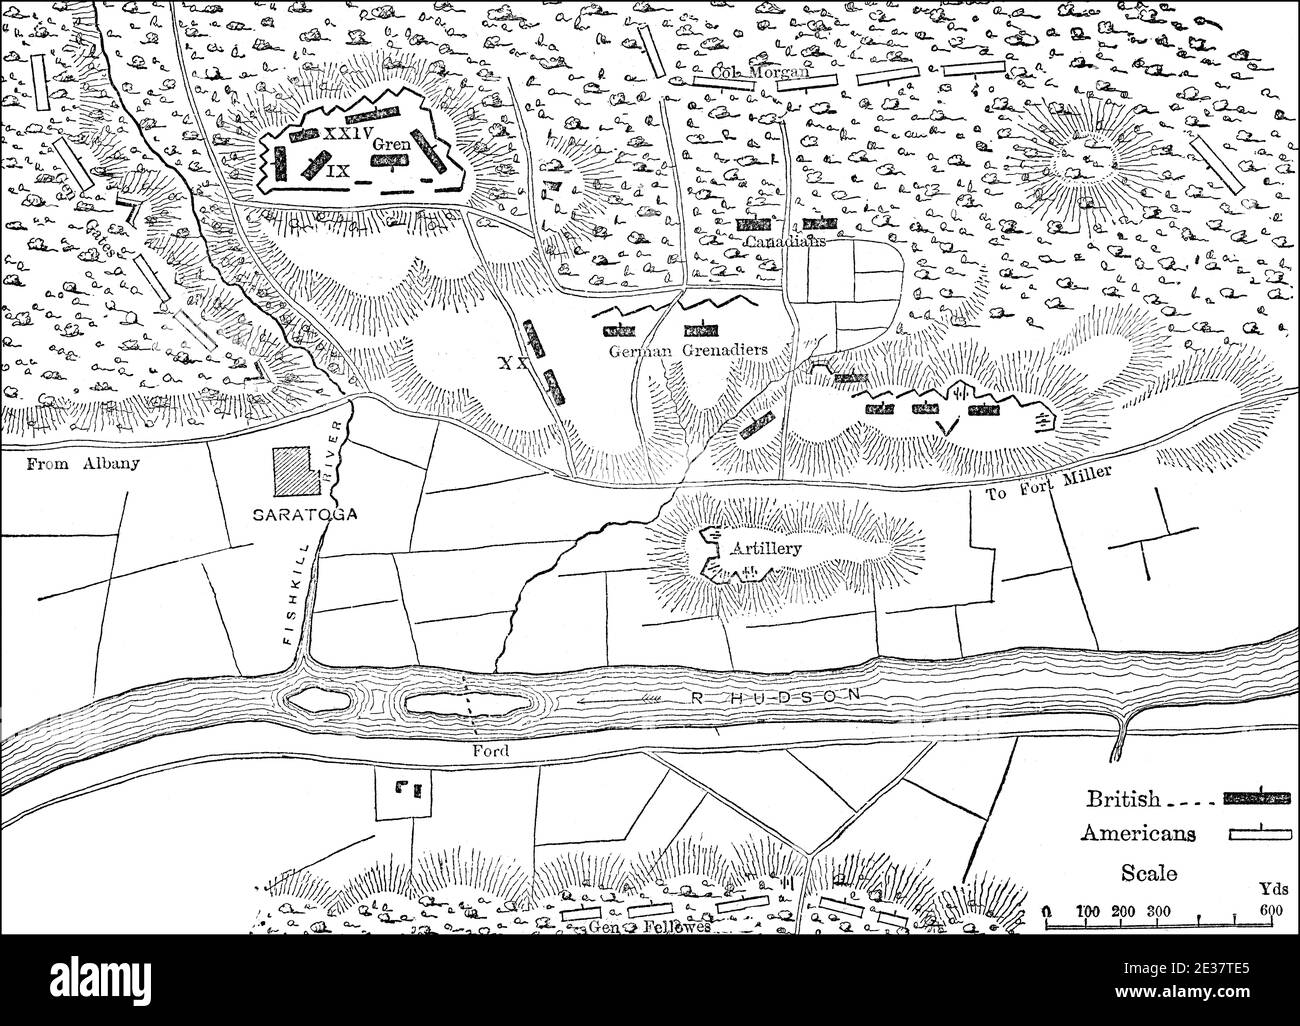 Plan of battlefield of the Saratoga campaign, September 19, 1777, American Revolutionary War Stock Photo